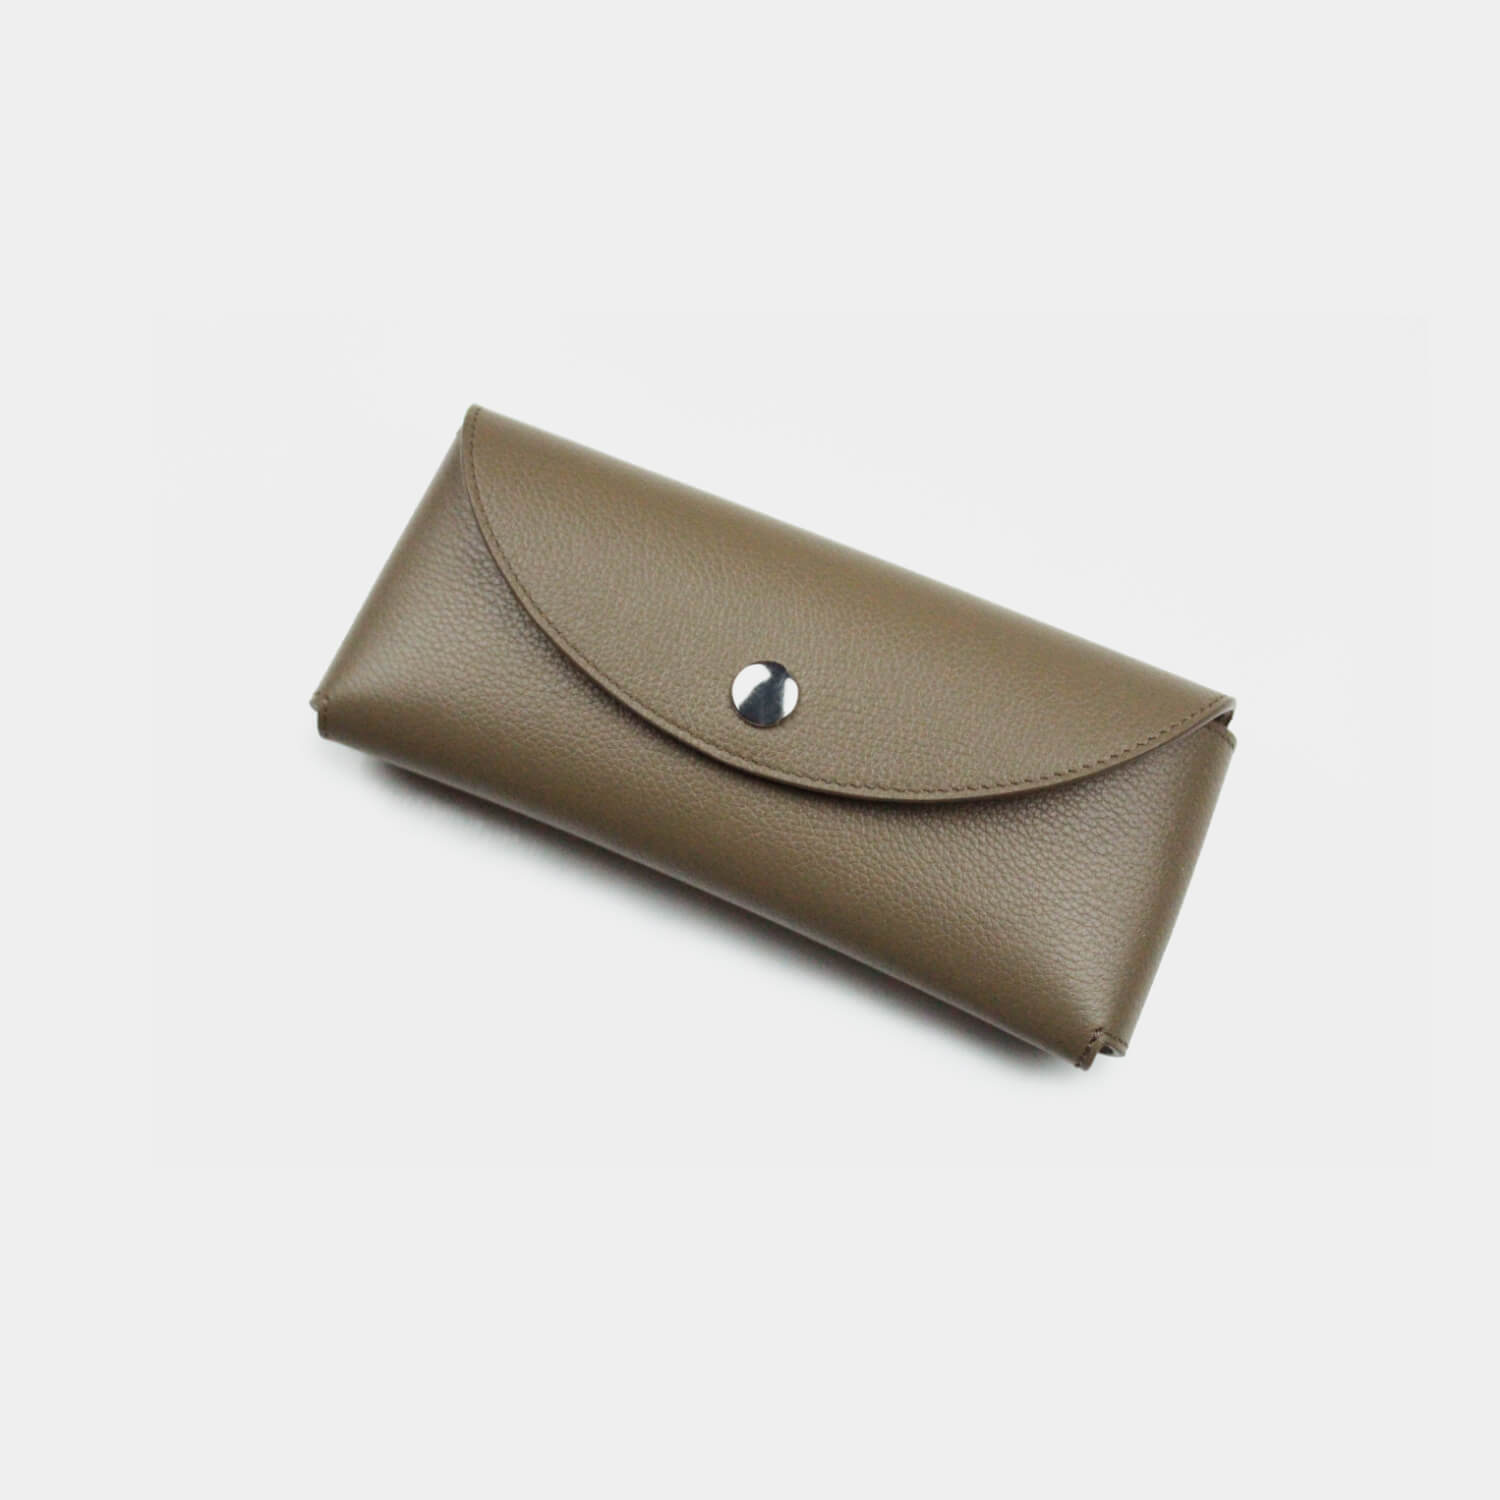 Fine grain leather glasses case with 3 poppers to open to protect and store, branded with your company logo